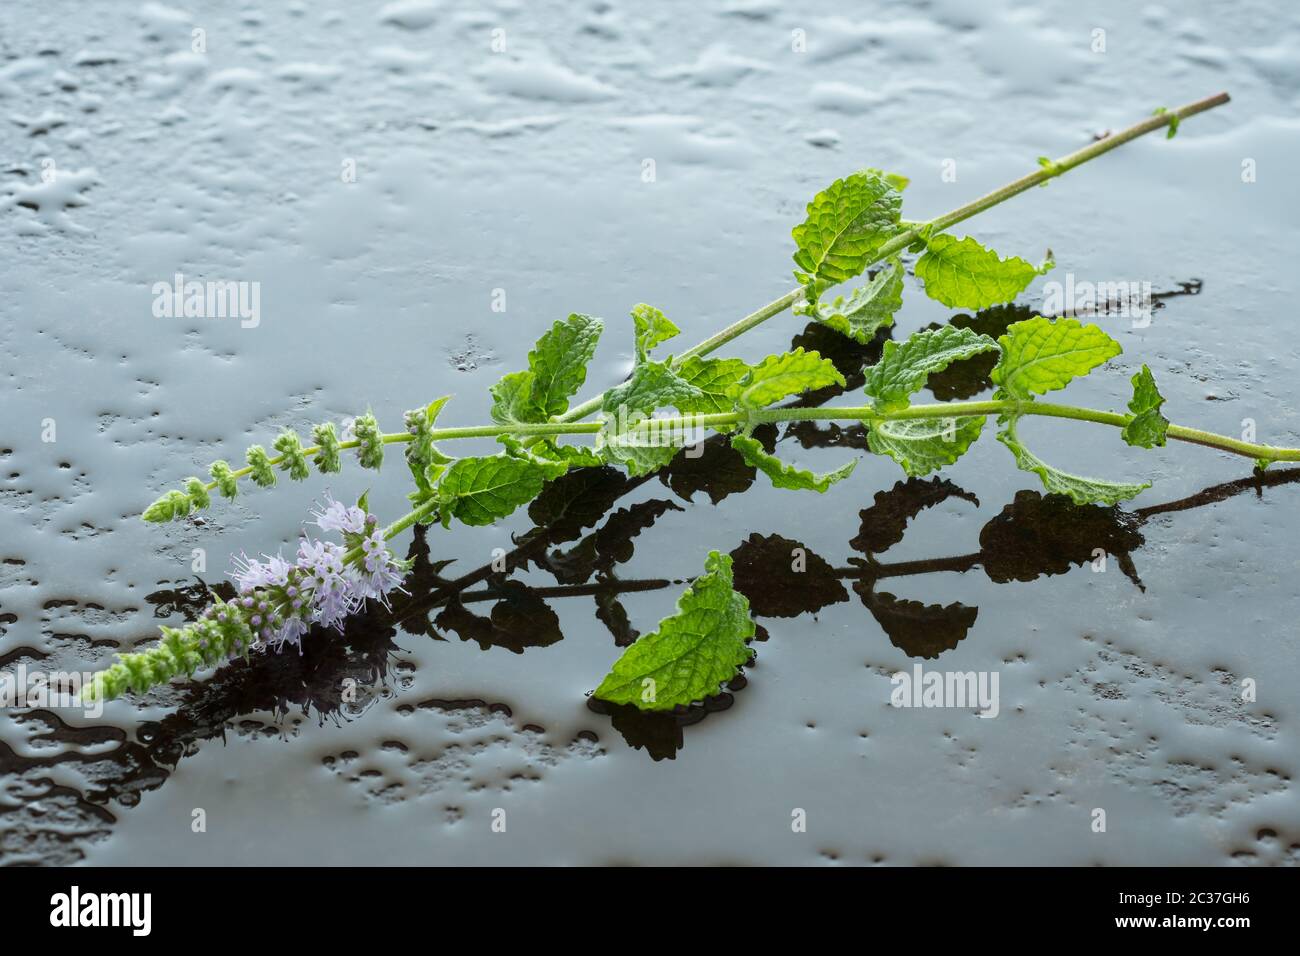 Green mint plant with flowers on water in back lit Stock Photo